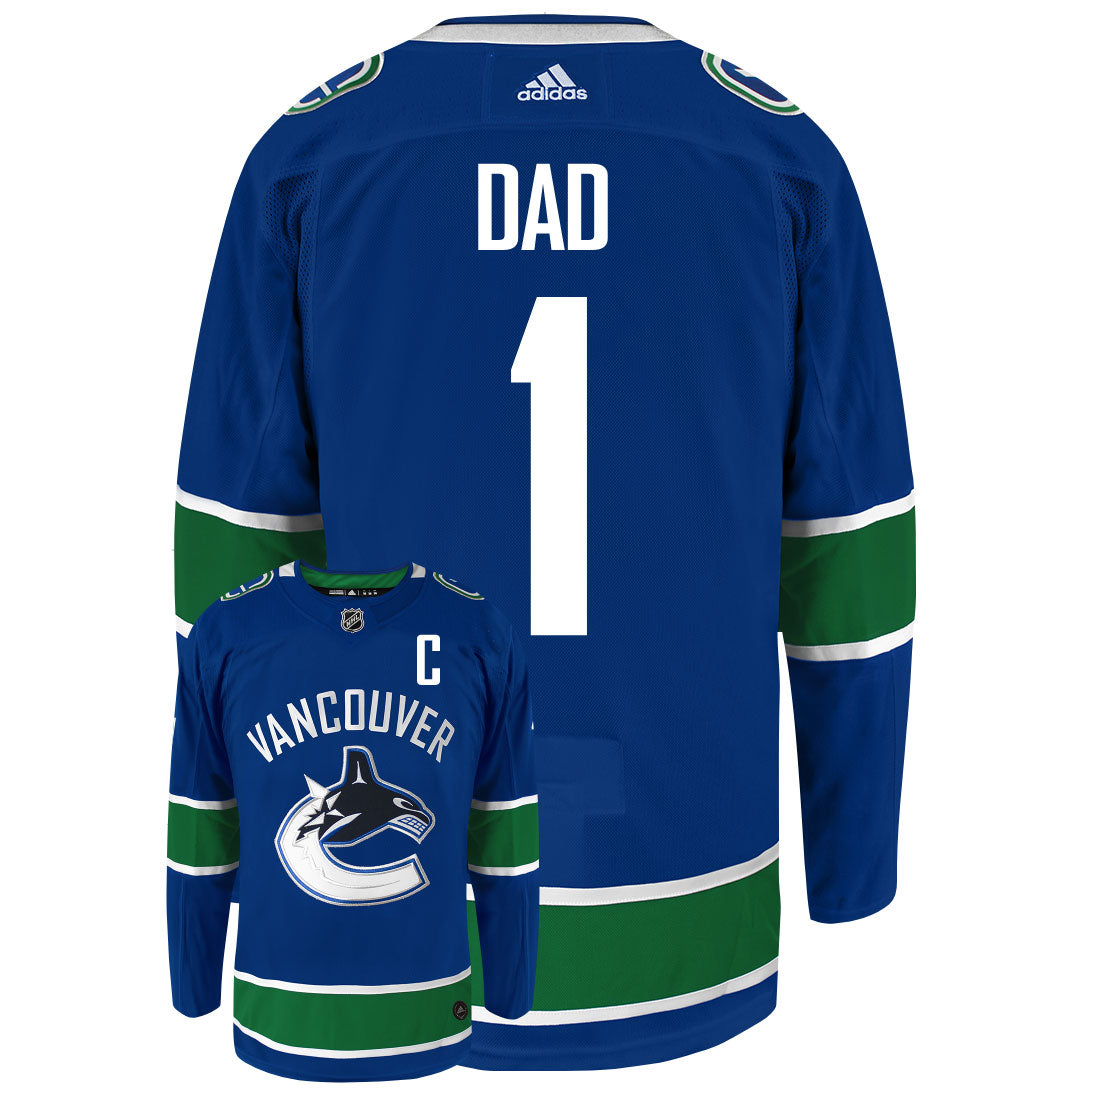 Vancouver Canucks Dad Number One Adidas Primegreen Authentic NHL Hockey Jersey